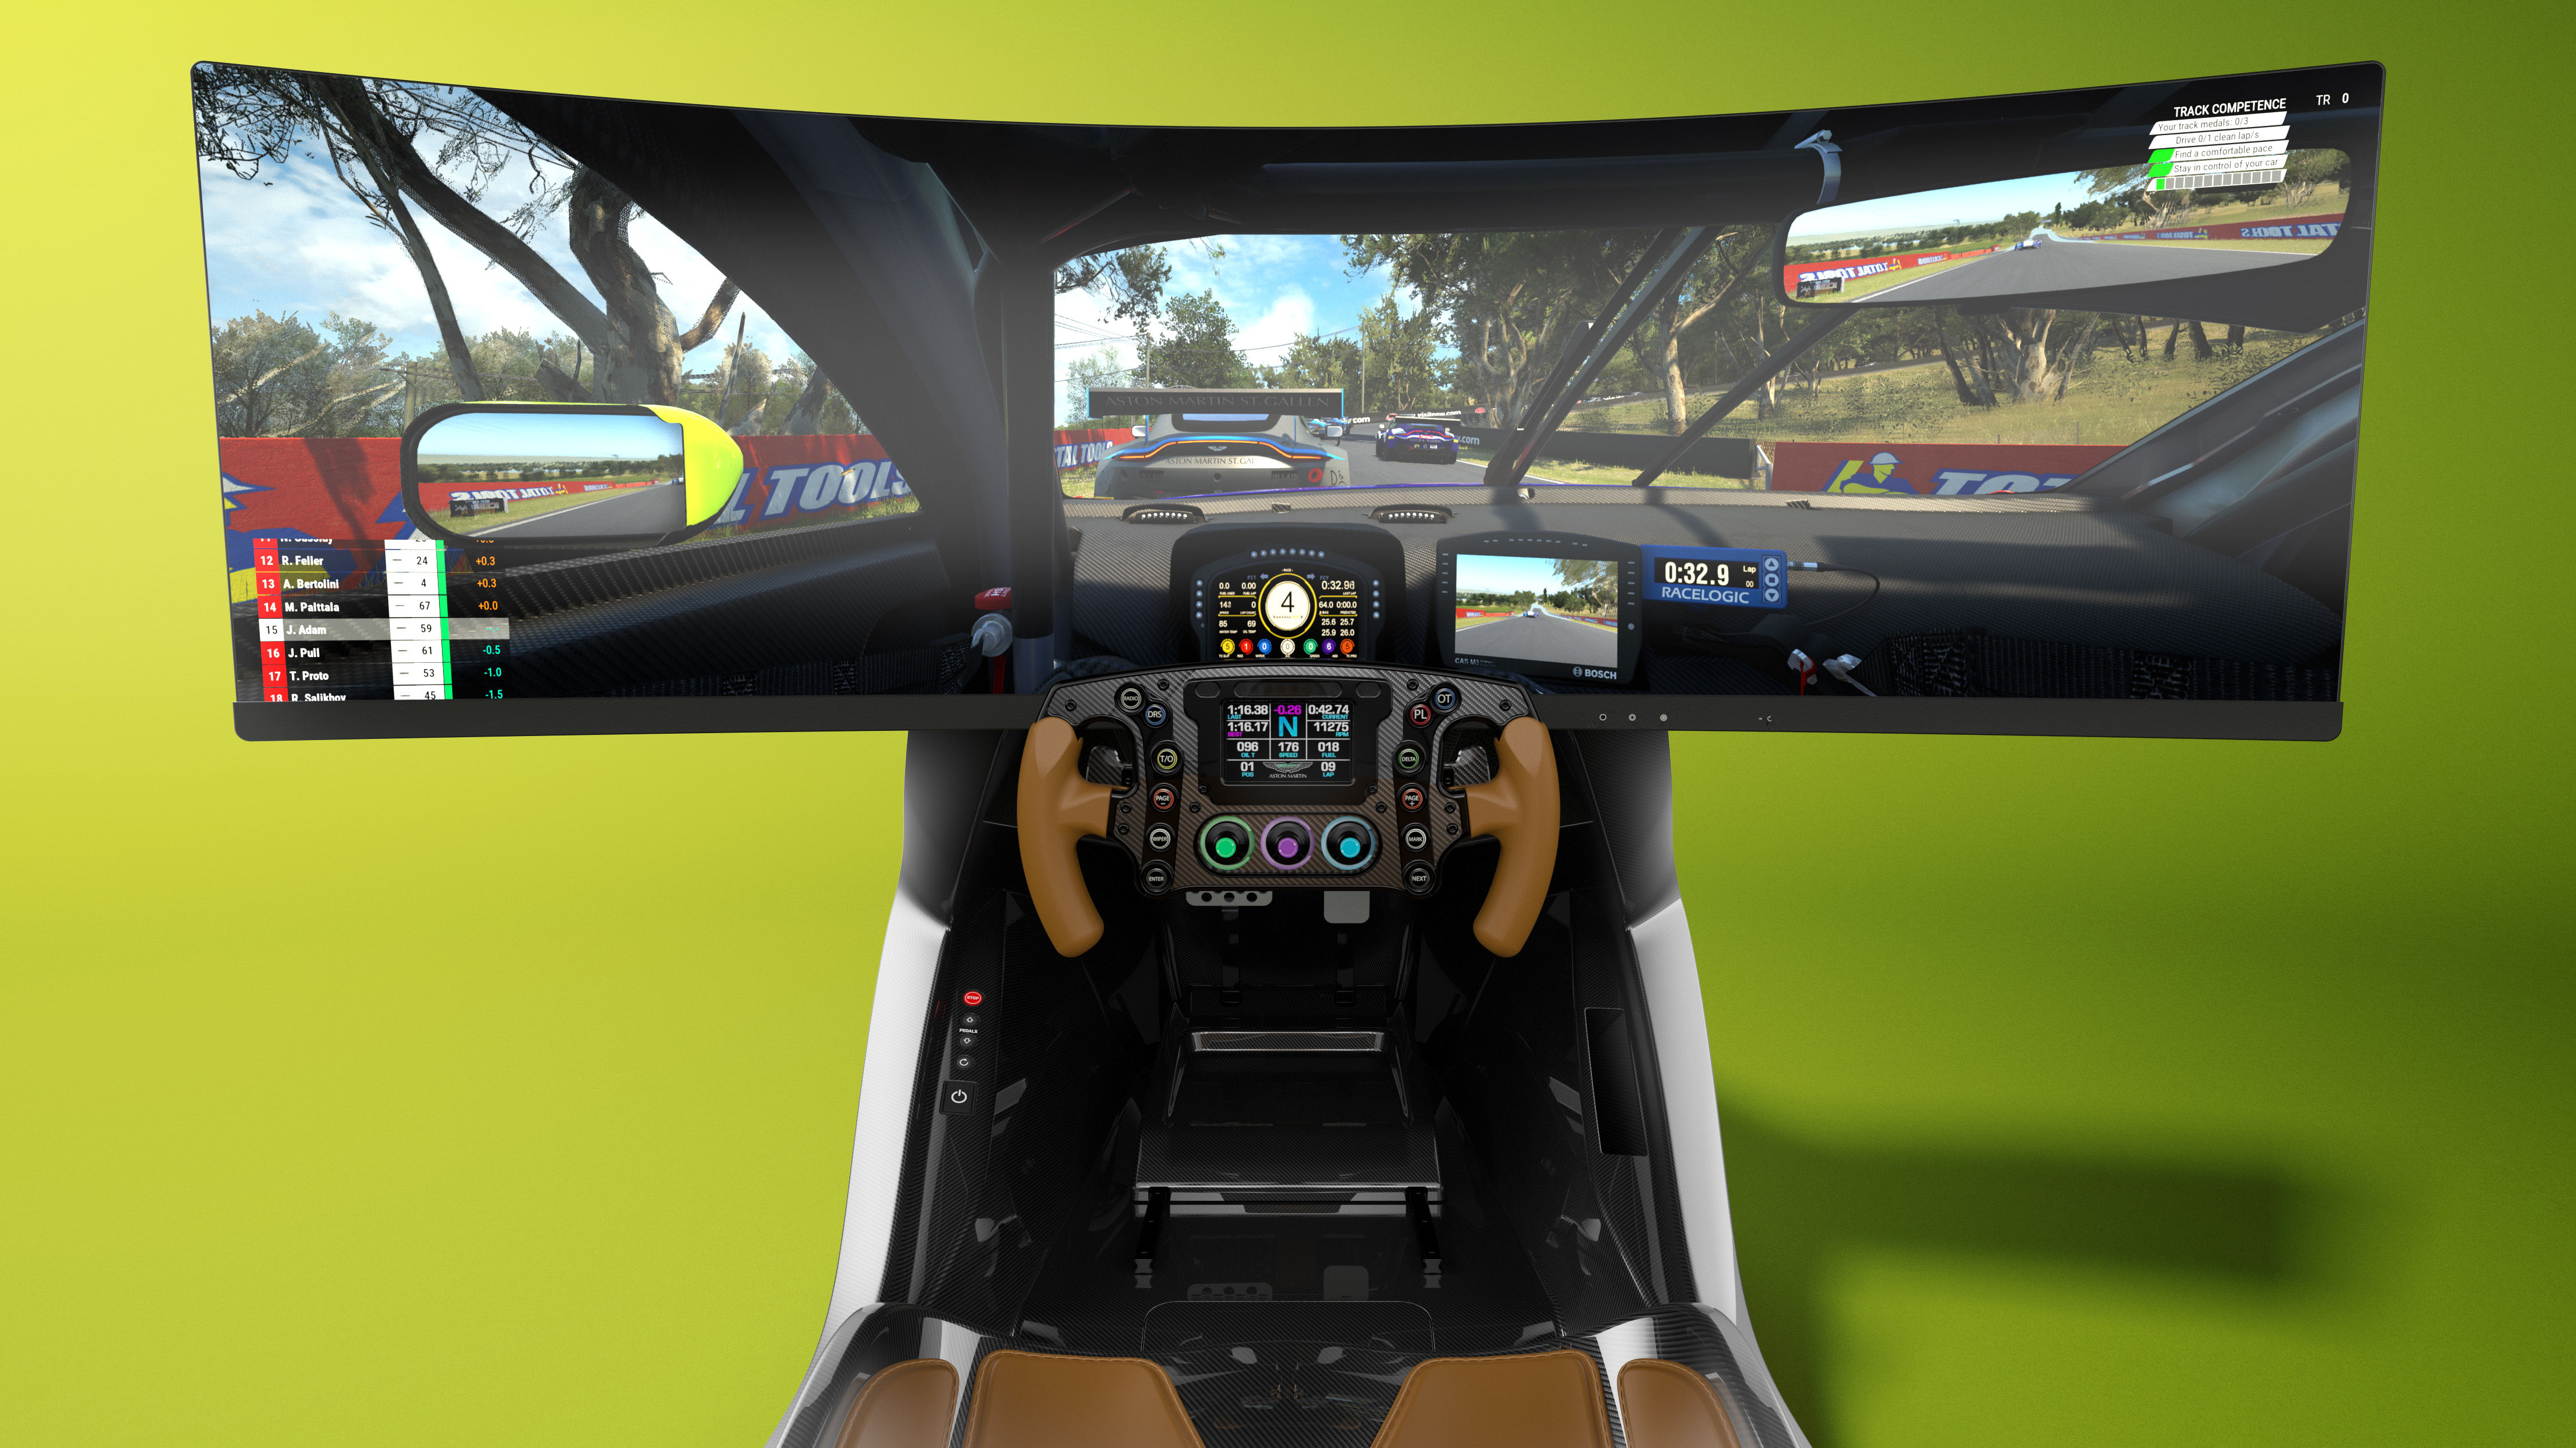 Only 150 units of Aston Martin AMR-C01 race simulator will be made.